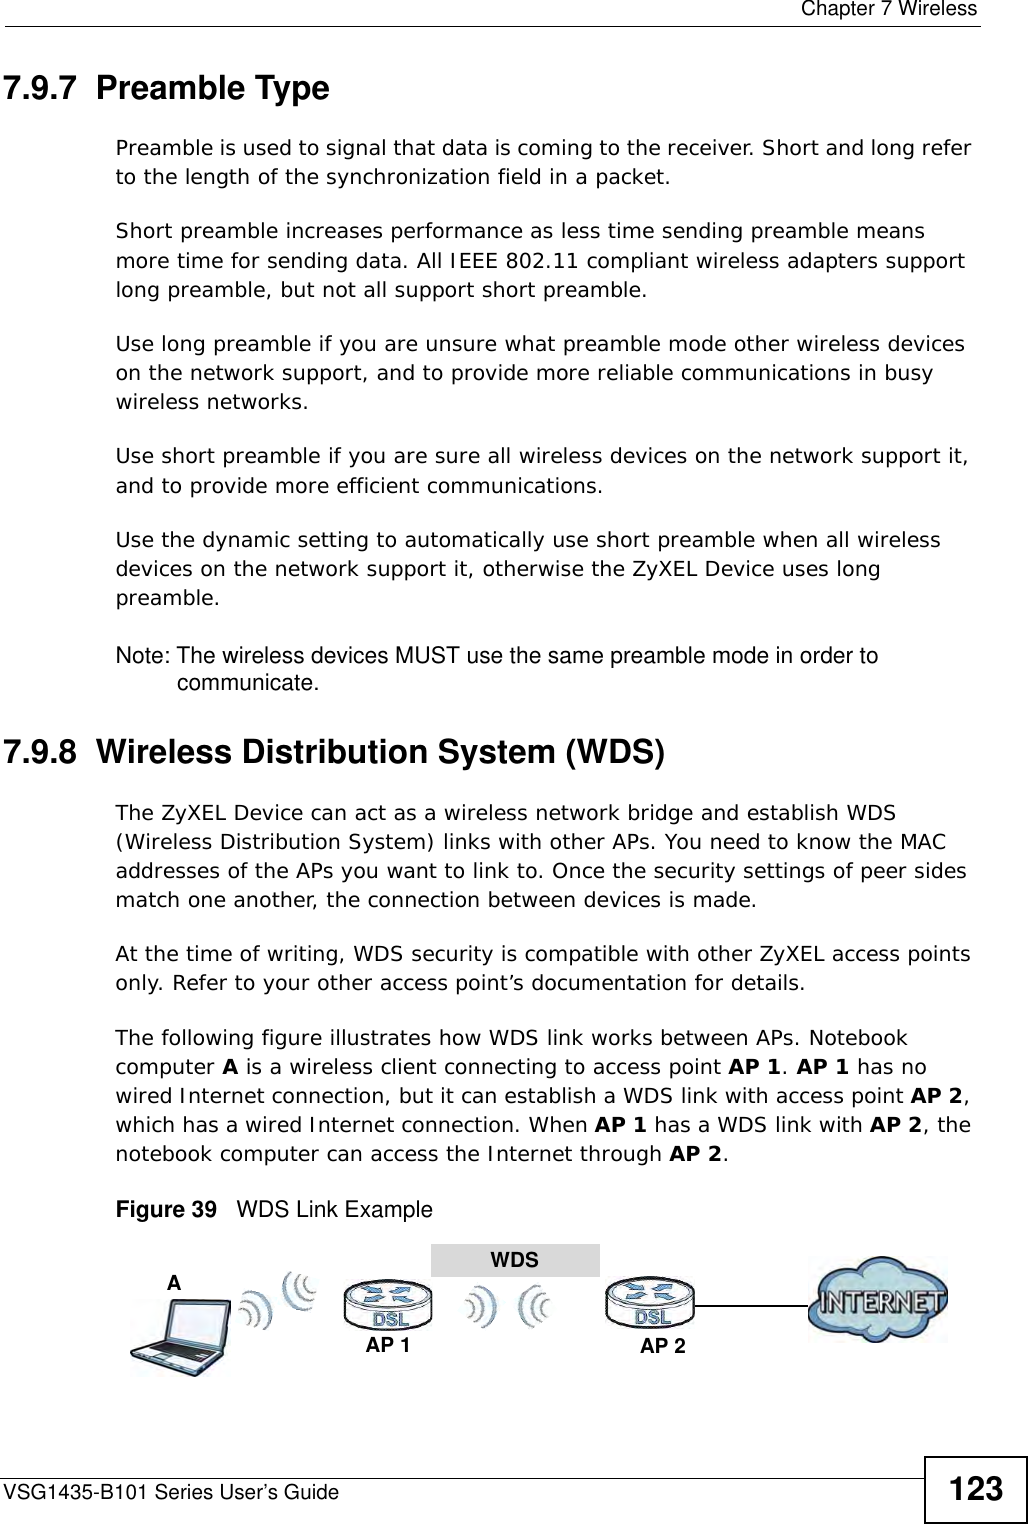  Chapter 7 WirelessVSG1435-B101 Series User’s Guide 1237.9.7  Preamble TypePreamble is used to signal that data is coming to the receiver. Short and long refer to the length of the synchronization field in a packet.Short preamble increases performance as less time sending preamble means more time for sending data. All IEEE 802.11 compliant wireless adapters support long preamble, but not all support short preamble. Use long preamble if you are unsure what preamble mode other wireless devices on the network support, and to provide more reliable communications in busy wireless networks. Use short preamble if you are sure all wireless devices on the network support it, and to provide more efficient communications.Use the dynamic setting to automatically use short preamble when all wireless devices on the network support it, otherwise the ZyXEL Device uses long preamble.Note: The wireless devices MUST use the same preamble mode in order to communicate.7.9.8  Wireless Distribution System (WDS)The ZyXEL Device can act as a wireless network bridge and establish WDS (Wireless Distribution System) links with other APs. You need to know the MAC addresses of the APs you want to link to. Once the security settings of peer sides match one another, the connection between devices is made.At the time of writing, WDS security is compatible with other ZyXEL access points only. Refer to your other access point’s documentation for details.The following figure illustrates how WDS link works between APs. Notebook computer A is a wireless client connecting to access point AP 1. AP 1 has no wired Internet connection, but it can establish a WDS link with access point AP 2, which has a wired Internet connection. When AP 1 has a WDS link with AP 2, the notebook computer can access the Internet through AP 2.Figure 39   WDS Link ExampleWDSAP 2AP 1A